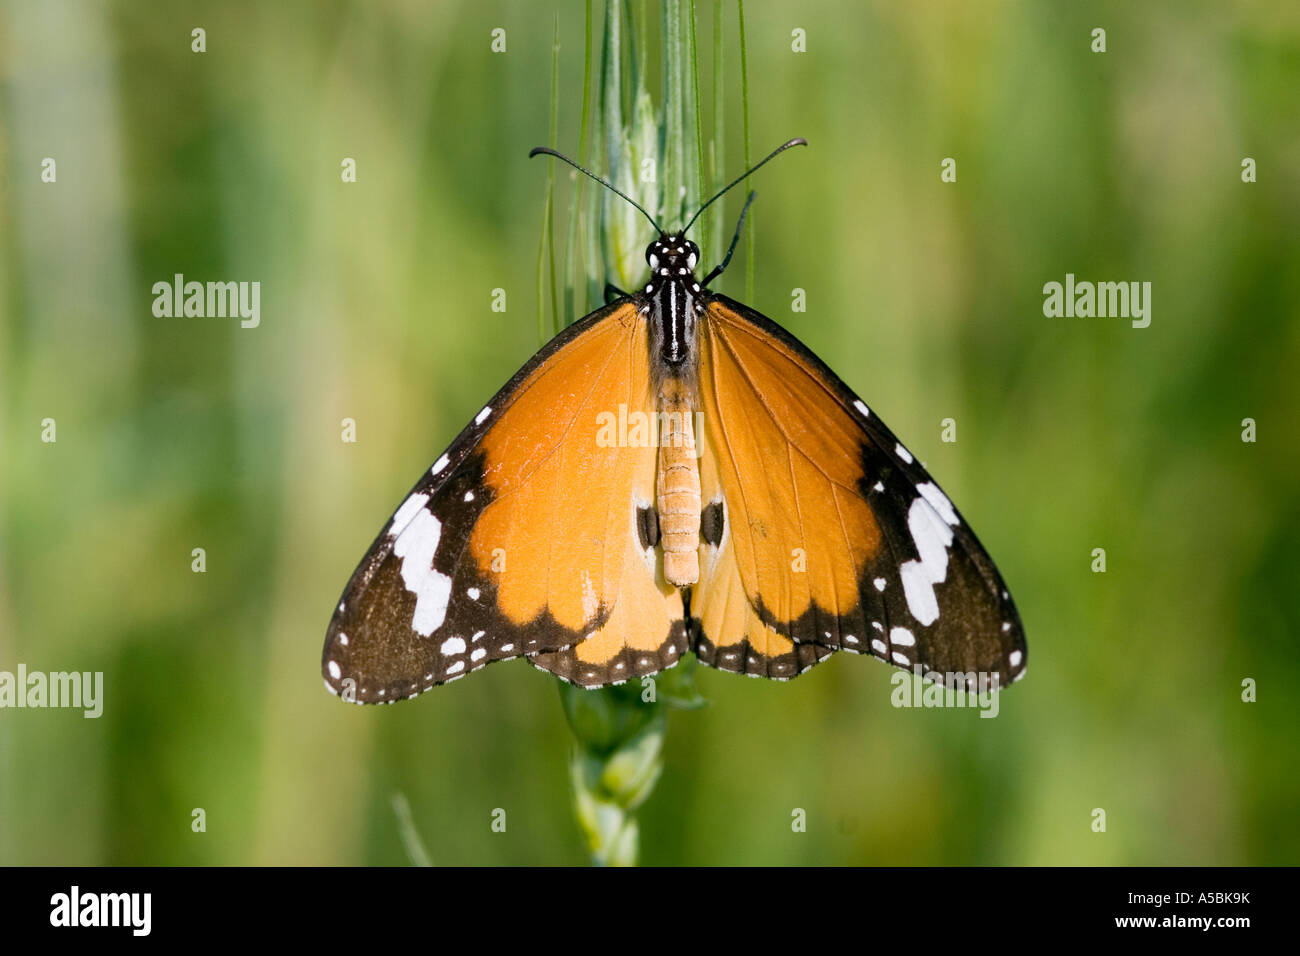 Danaus chrysippus. Single plain tiger butterfly in the indian countryside. India Stock Photo